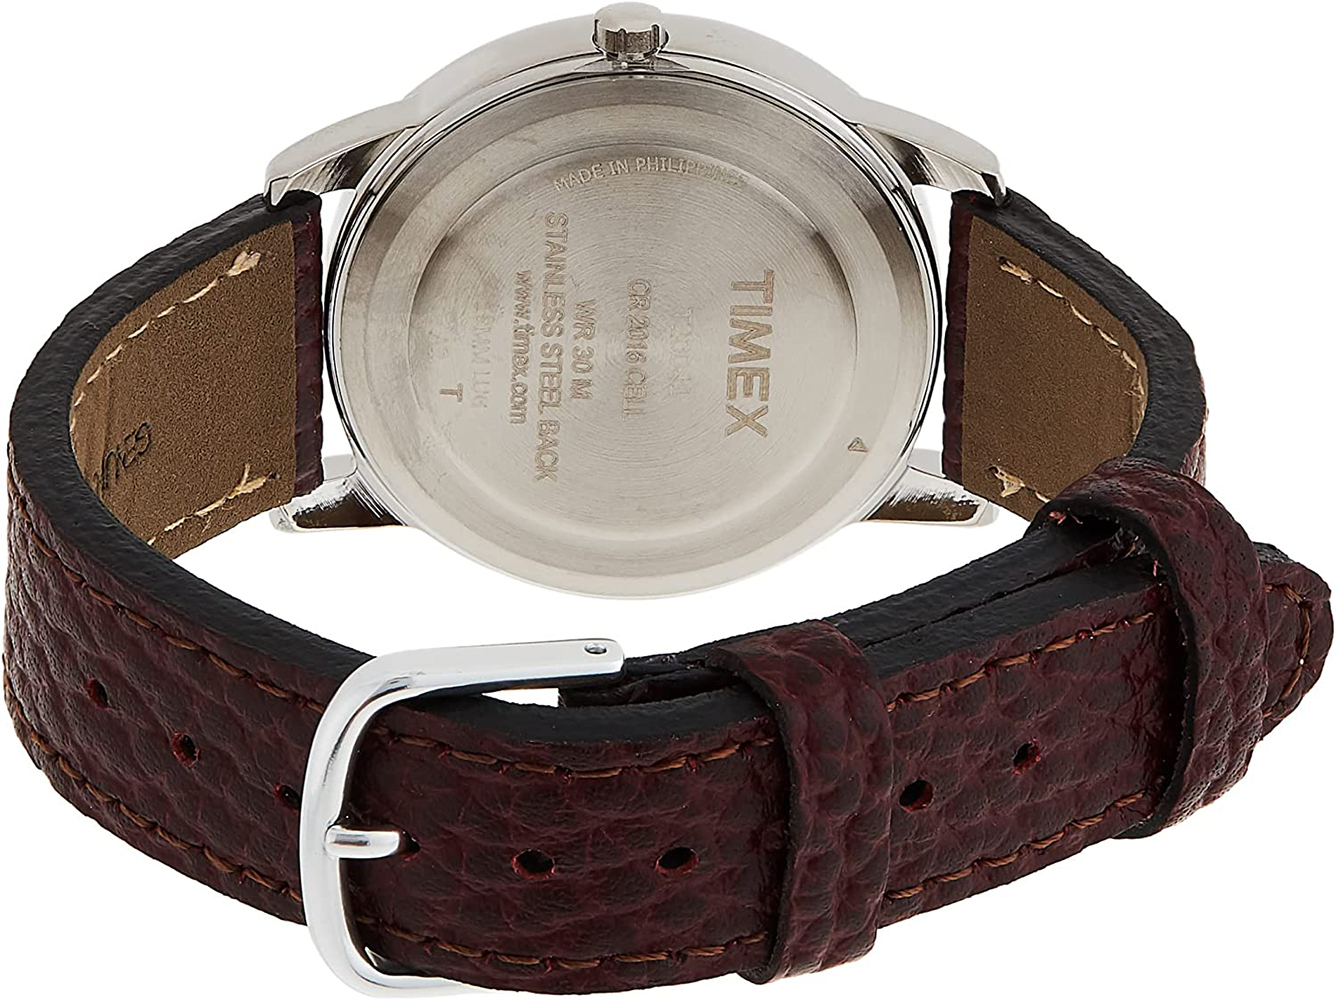 Timex Men's Easy Reader 35mm Day-Date Watch – Silver-Tone Case White Dial with Dark Brown Leather Strap - image 4 of 6